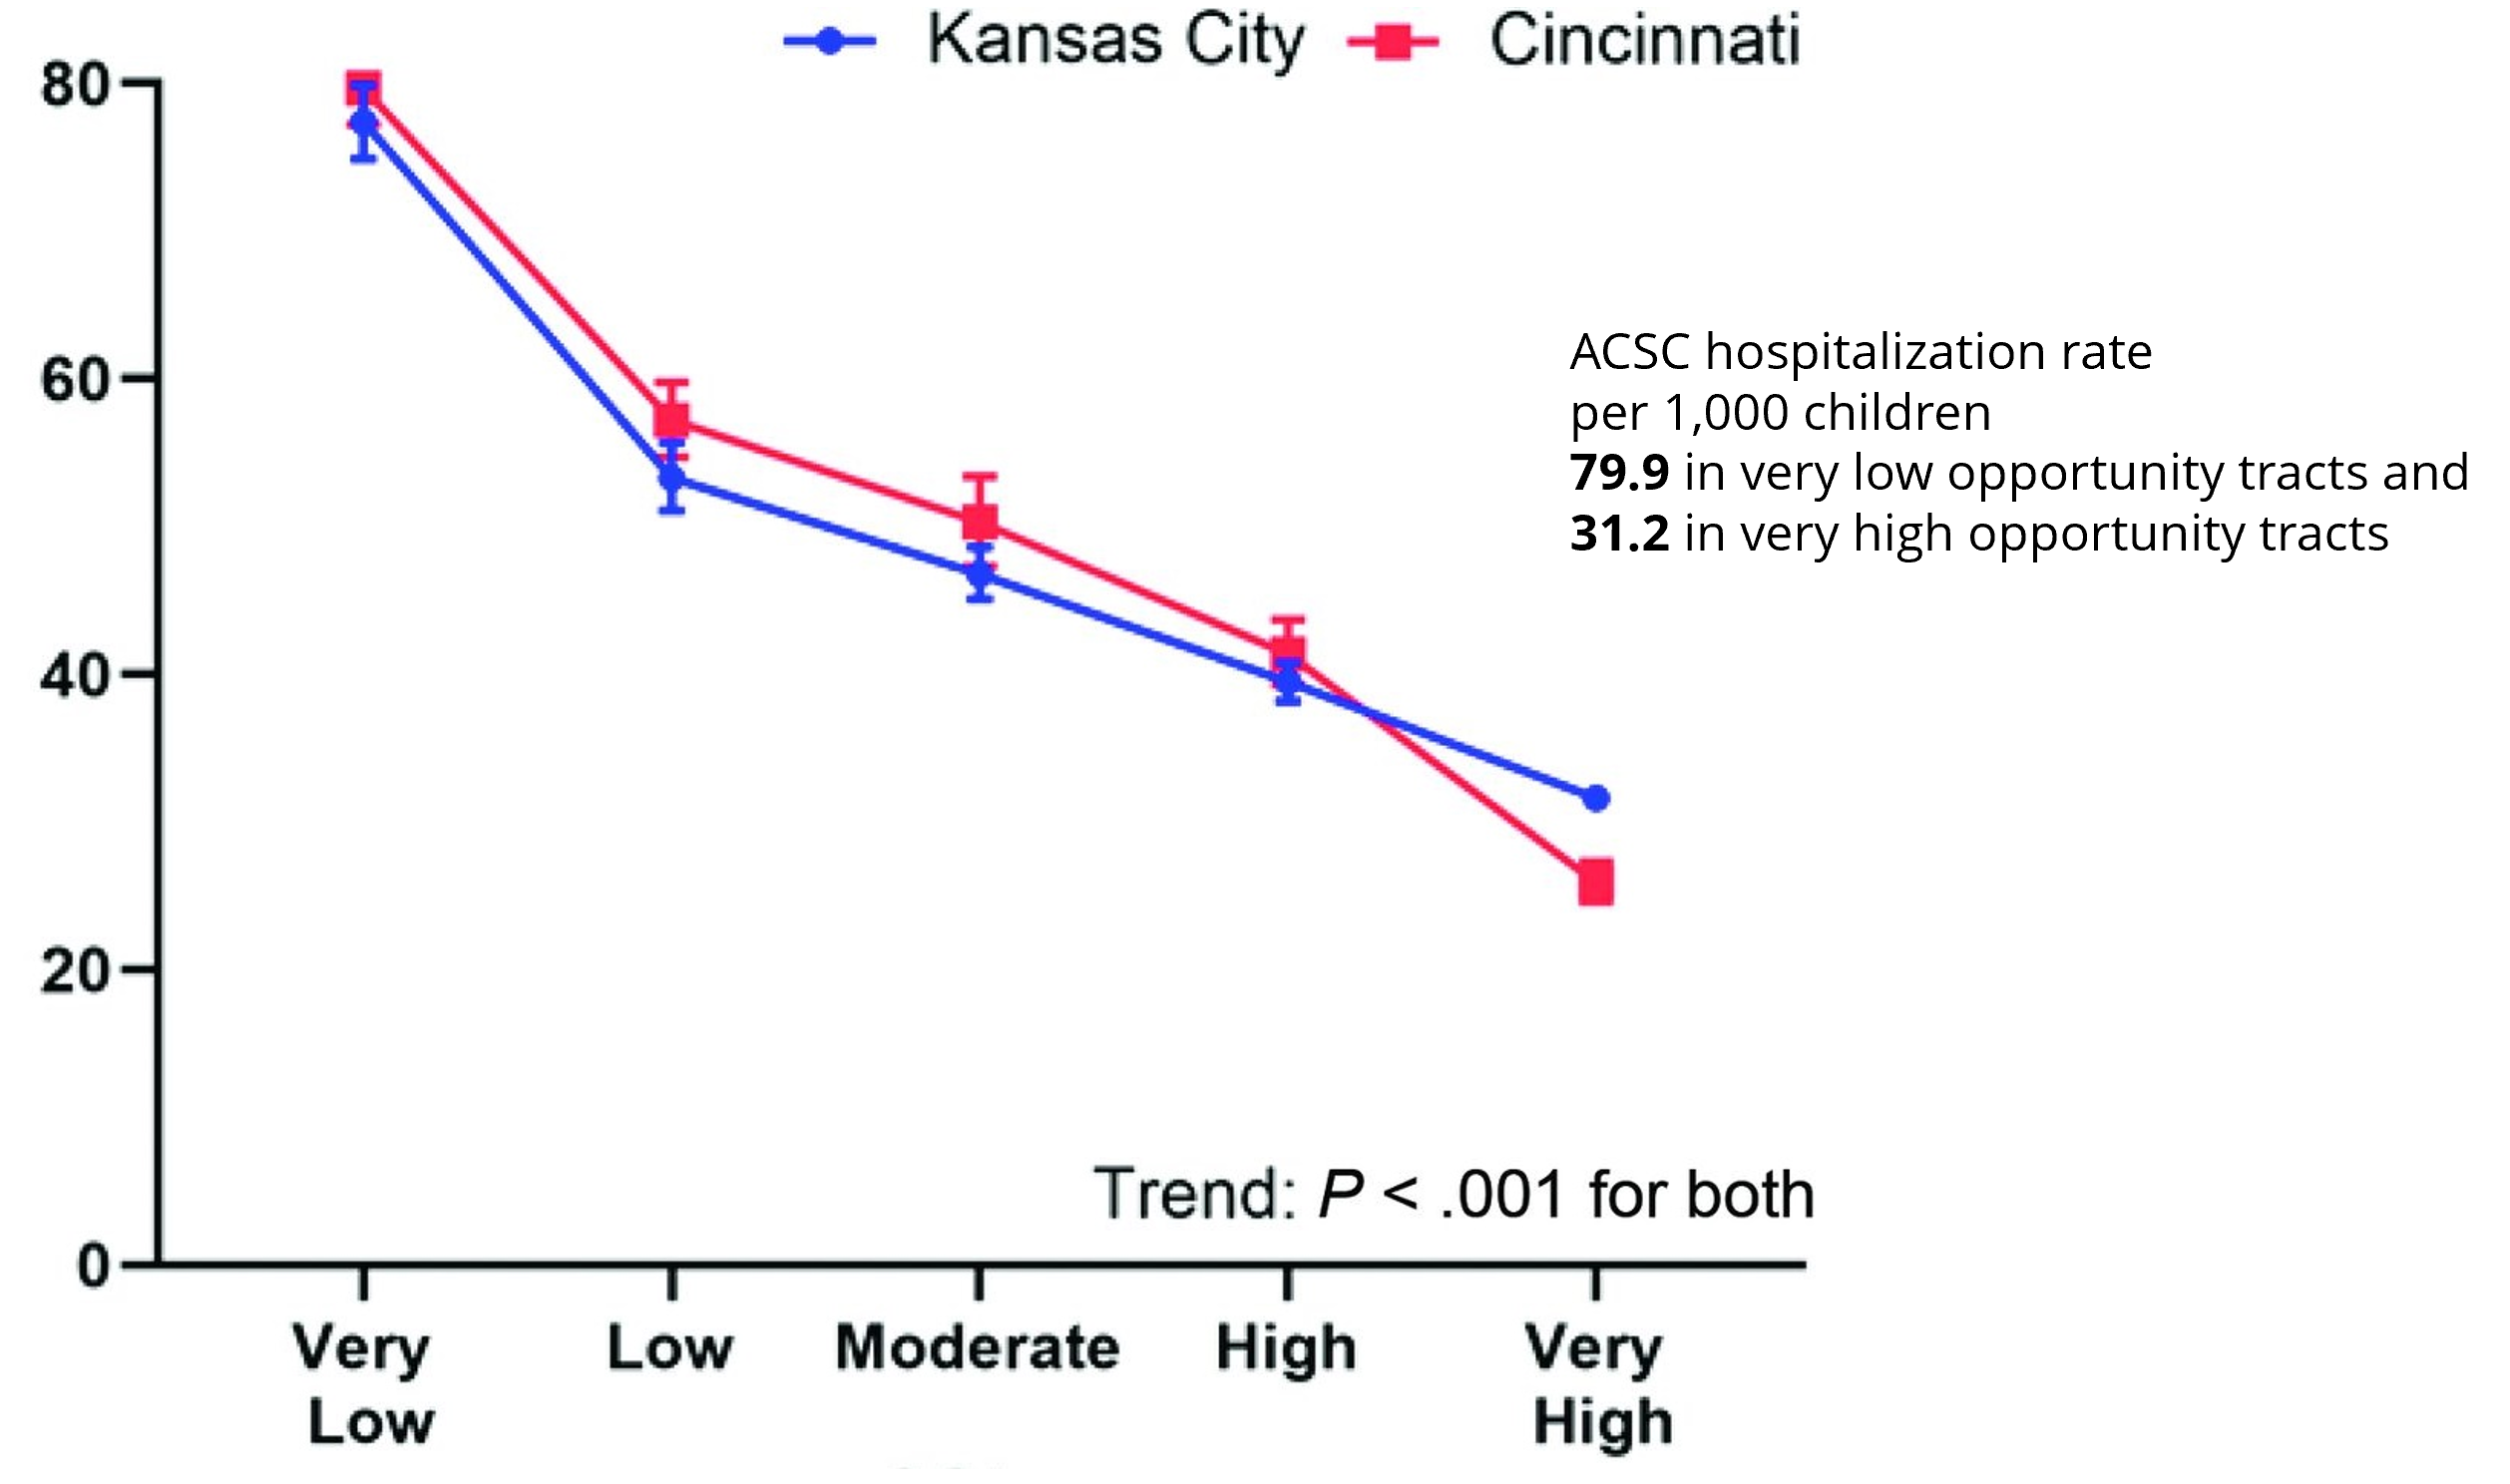 Graph showing the relationship between ACSCs hospitalizations and neighborhood opportunity in two metros